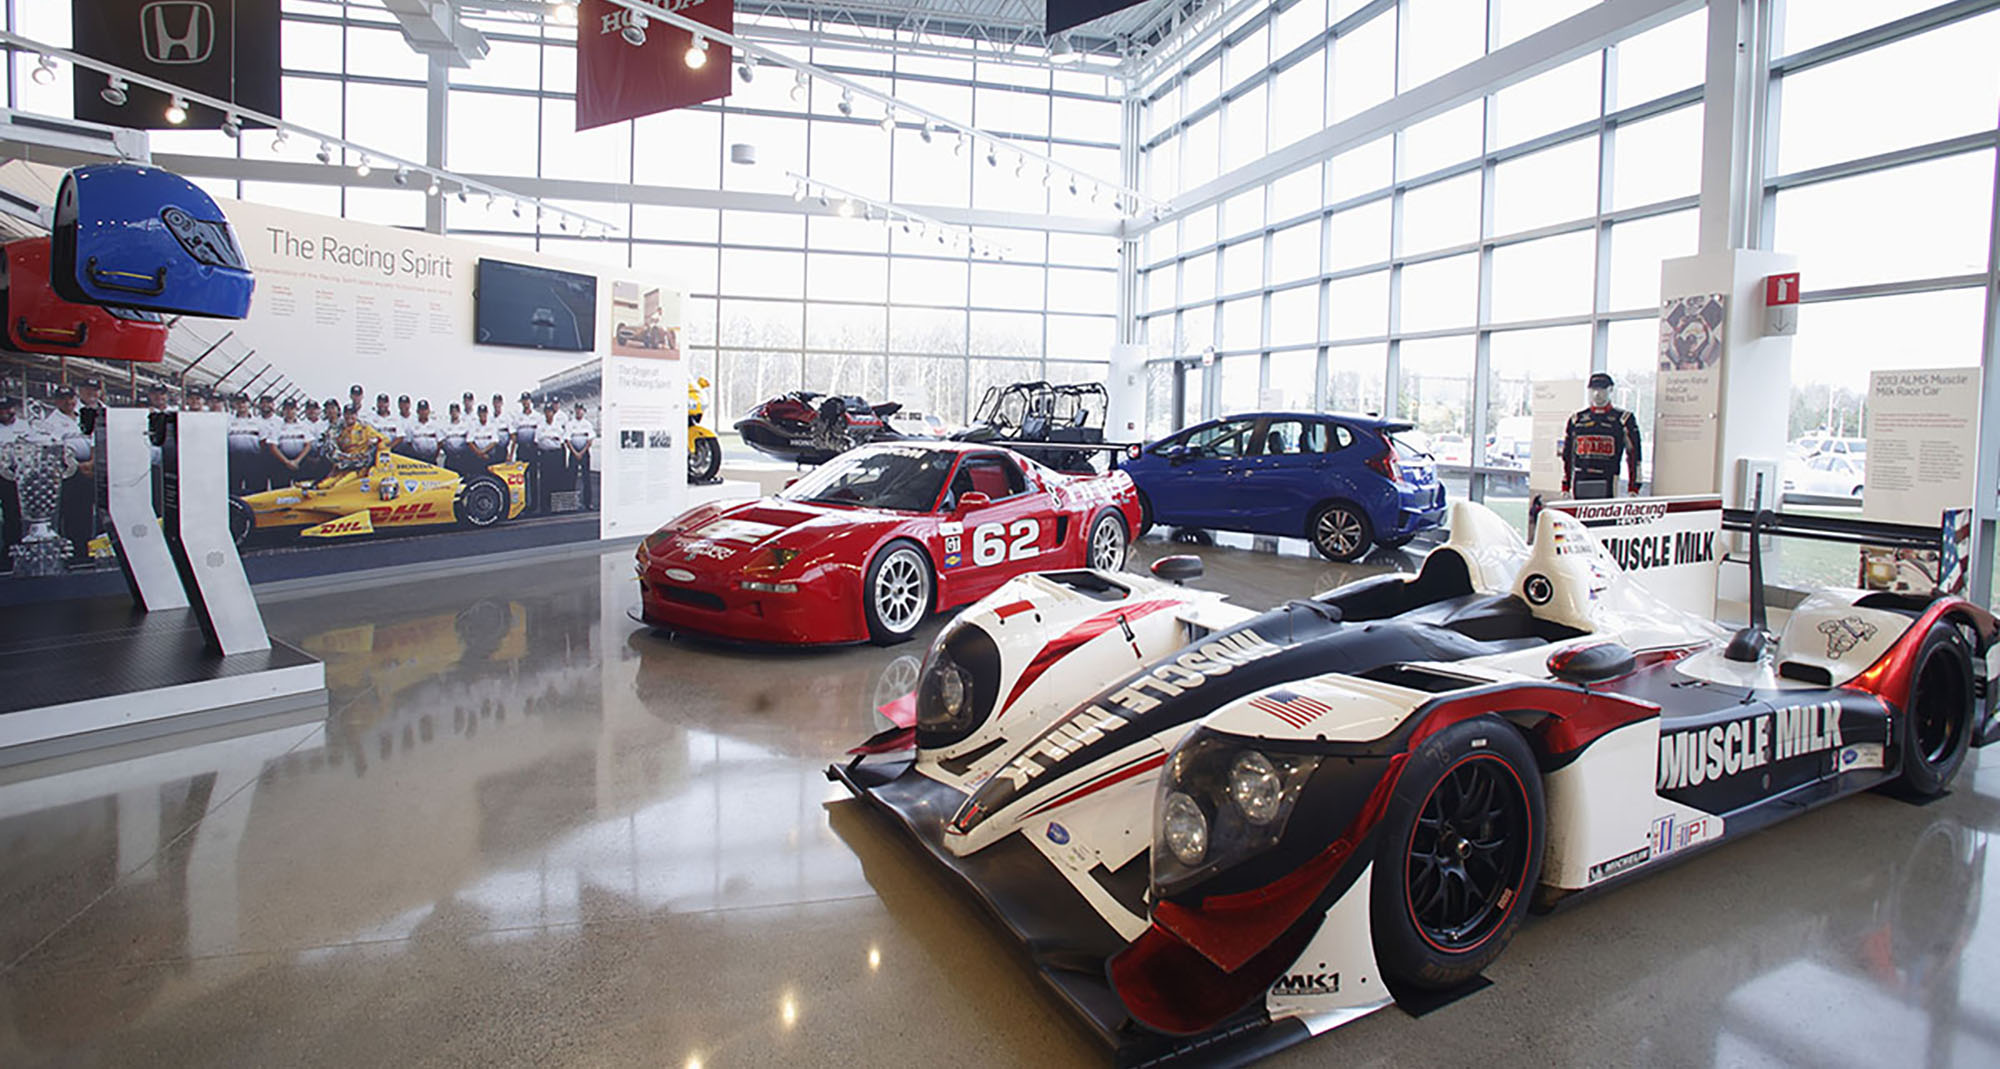 Spotlight on the Honda Heritage Center and the Honda Collection Hall